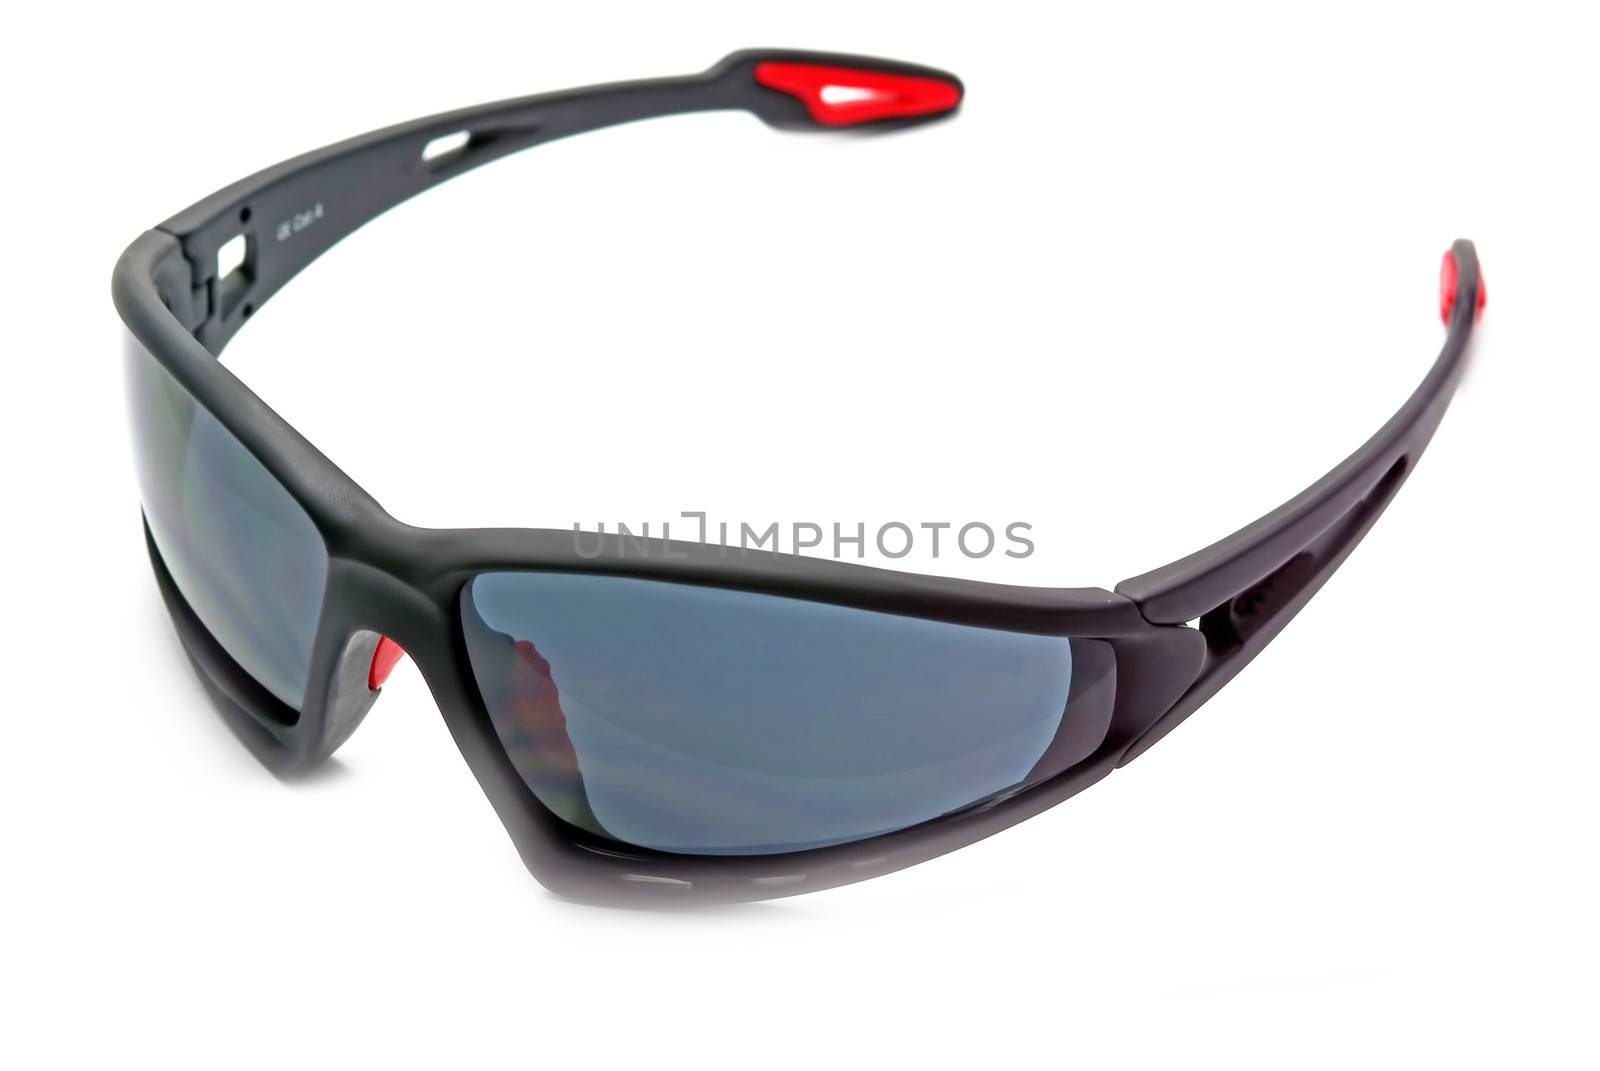 Black eyeglasses for outdoor activities over white